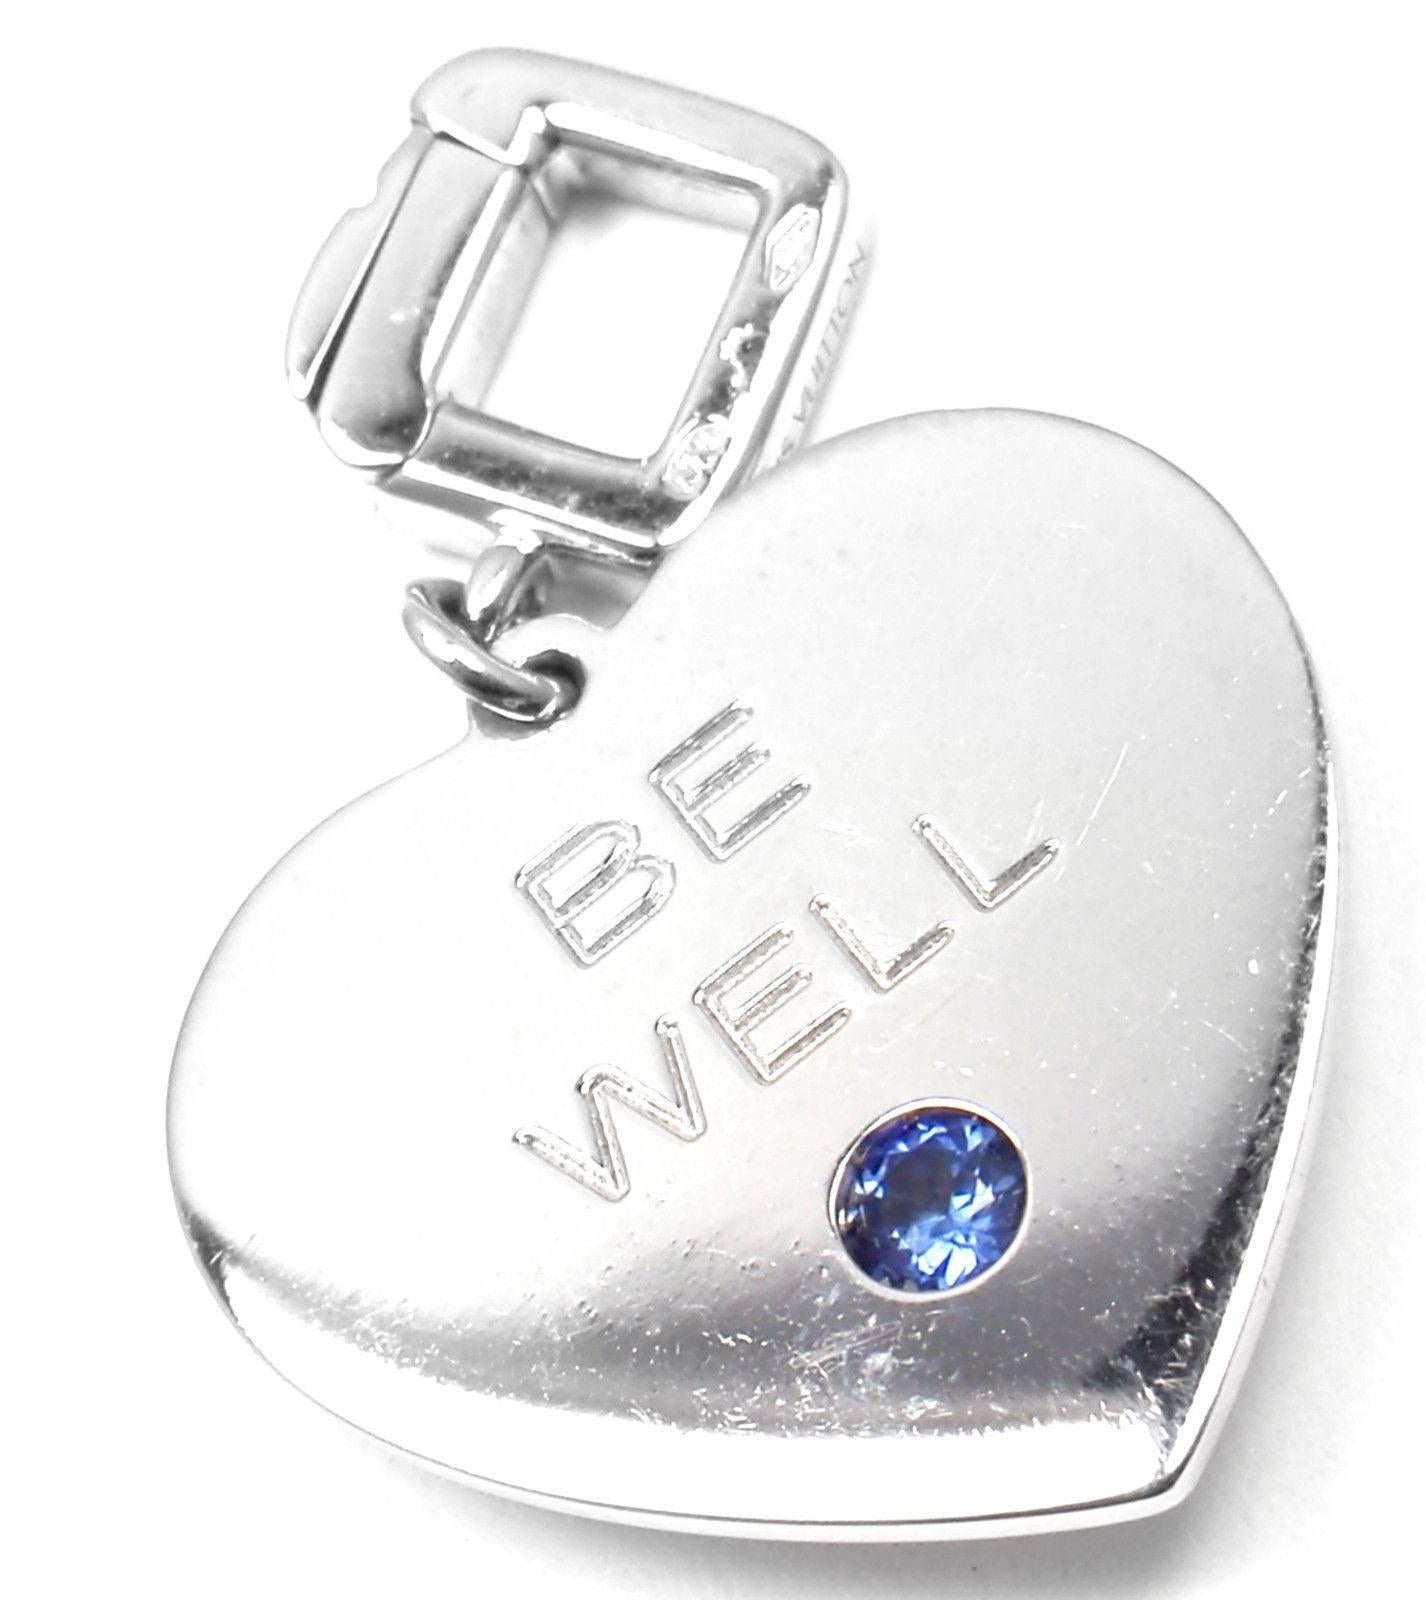 18k White Gold Enamel Sapphire Be Well Charm Pendant by Louis Vuitton. 
With 1 round sapphire 3mm

Details: 
Measurements: 1.15" x .85 inches"
Weight: 10.3 grams
Stamped Hallmarks: 750 Louis Vuitton LV French Hallmarks
*Free Shipping